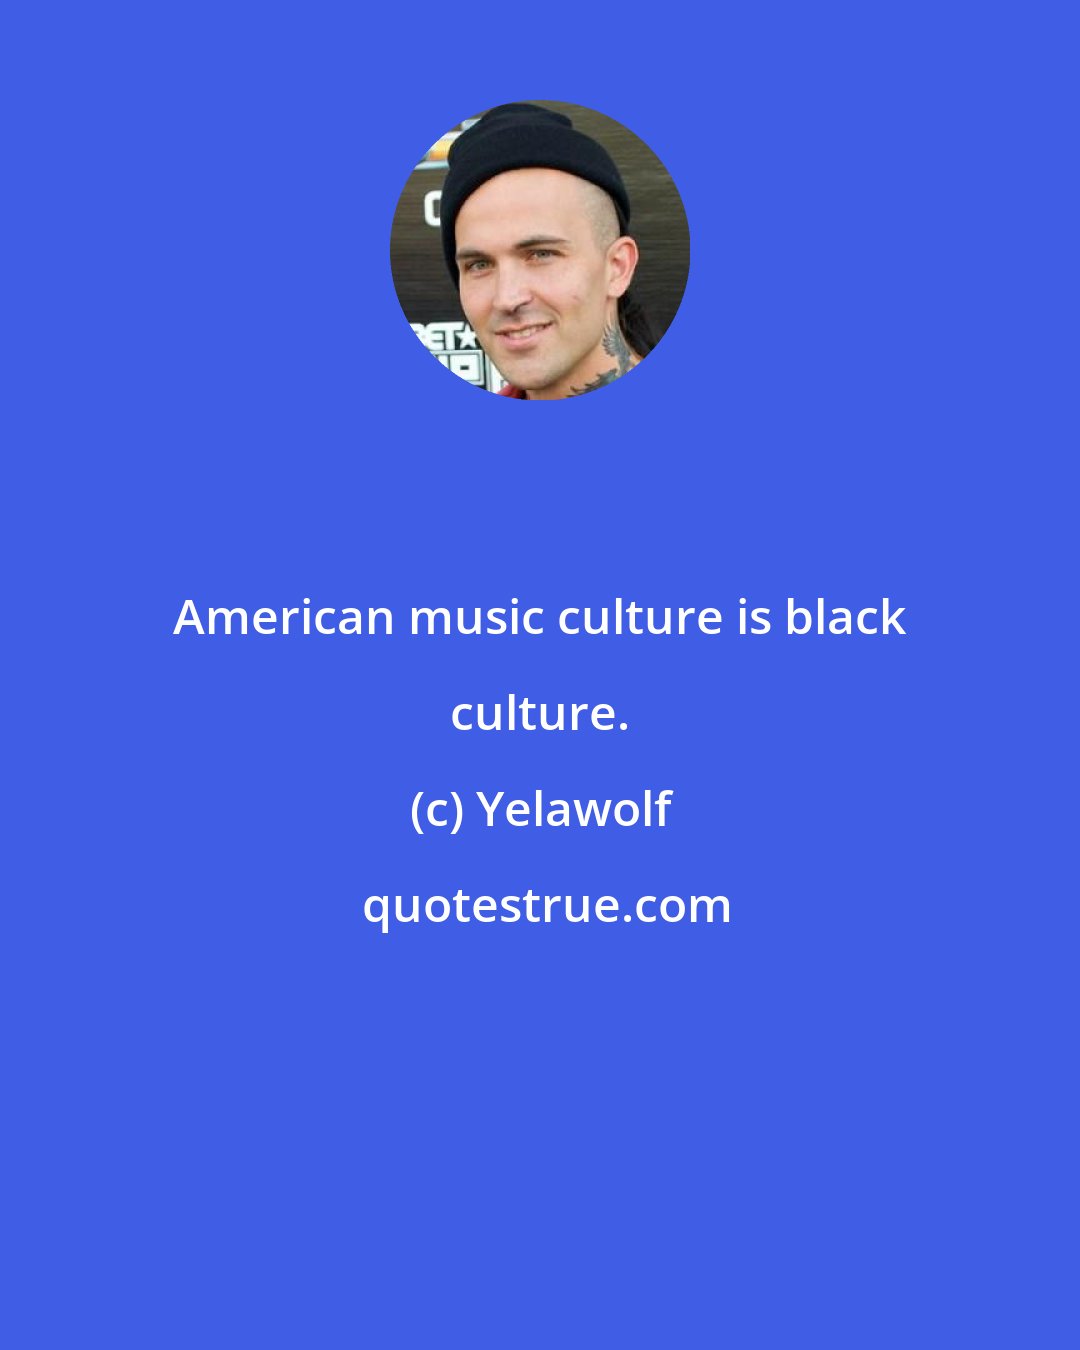 Yelawolf: American music culture is black culture.